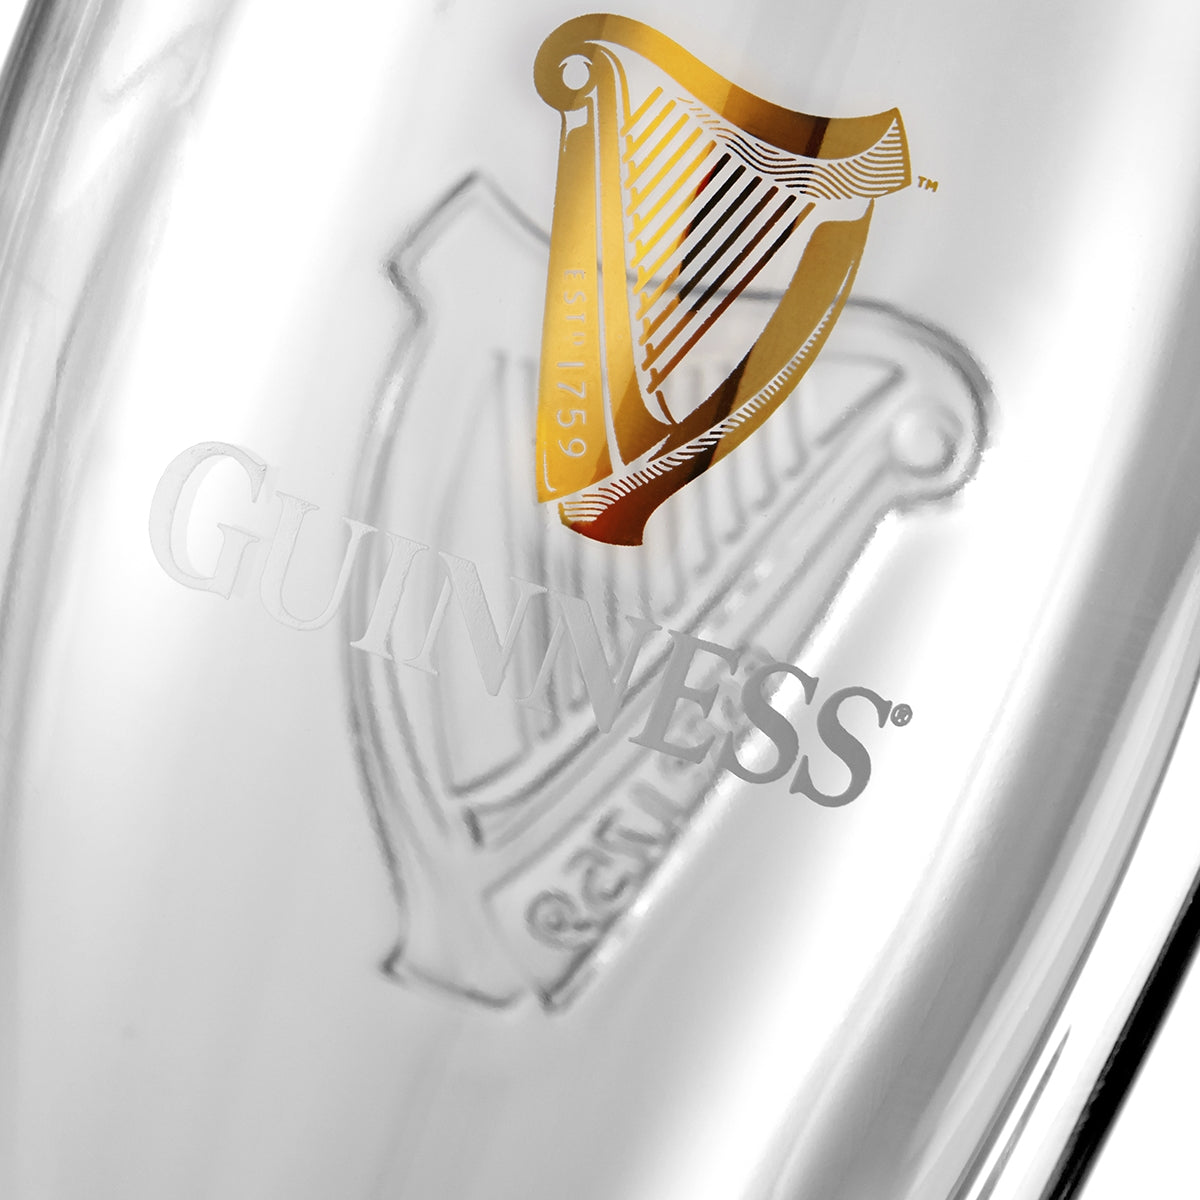 A close up of a Guinness UK 2 Pack pint glass.